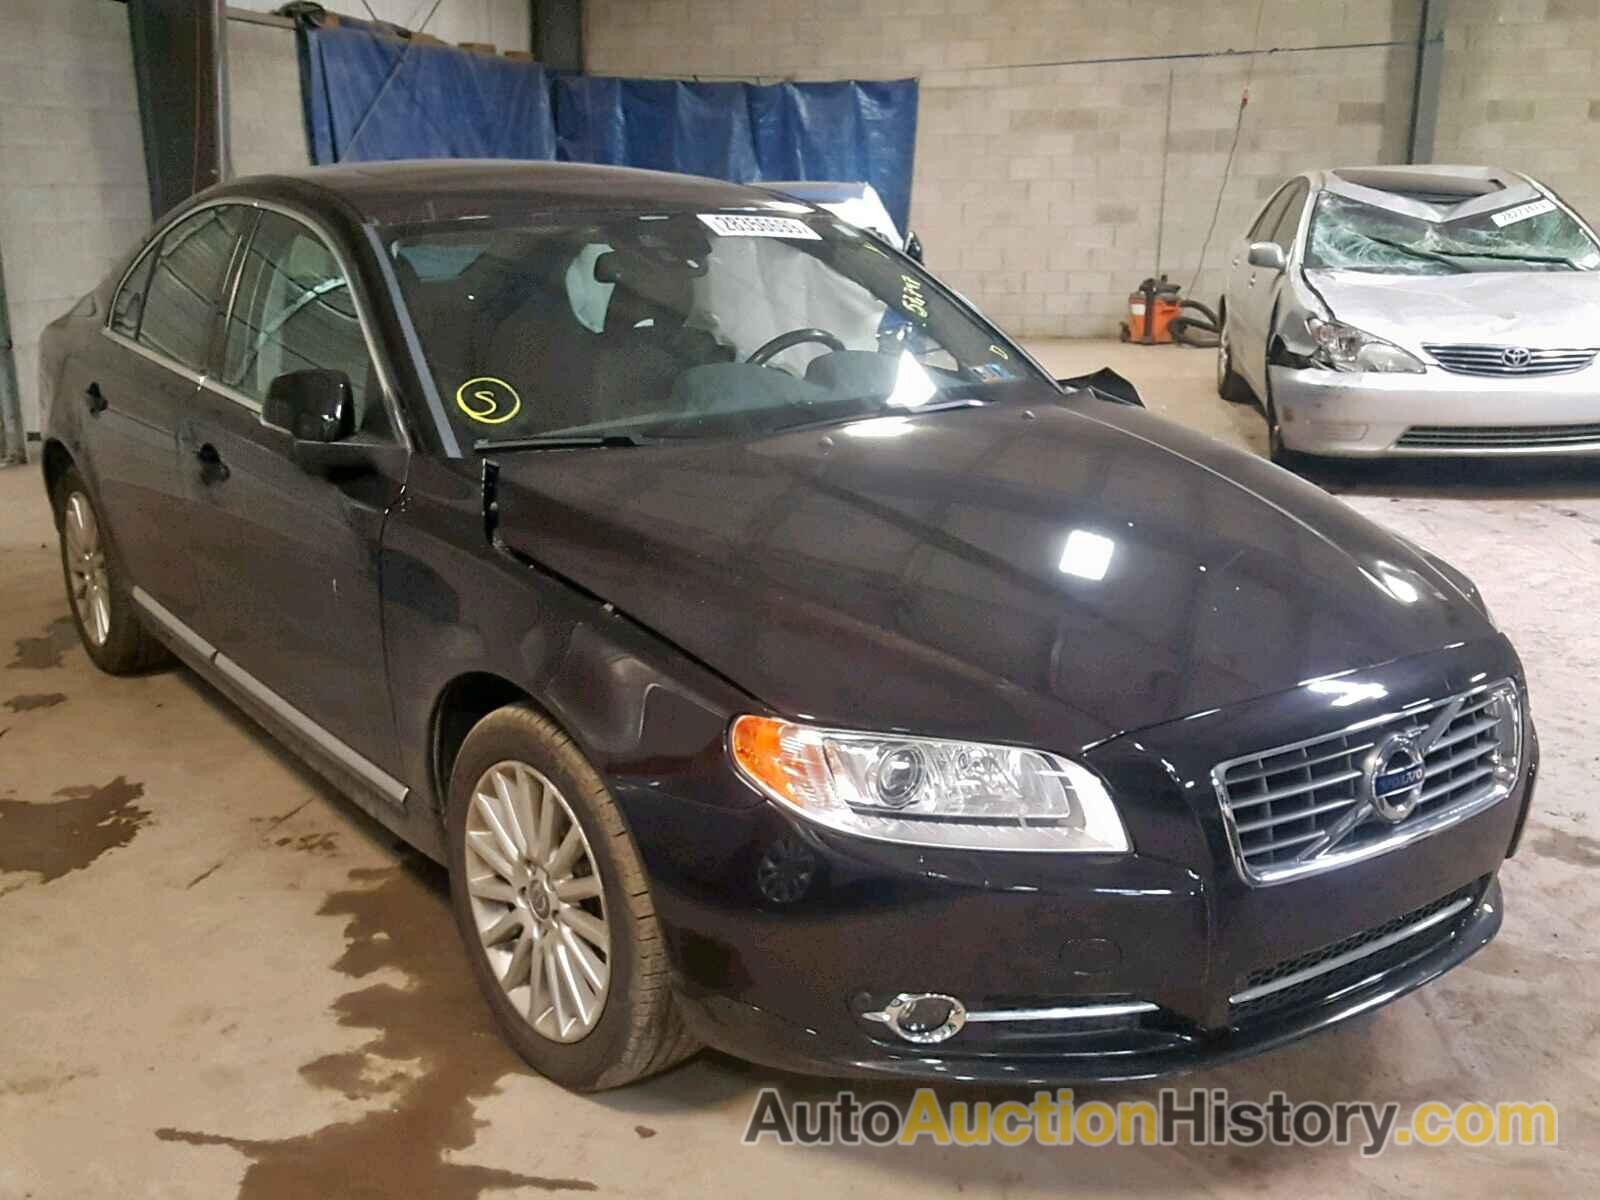 2013 VOLVO S80 3.2, YV1940AS4D1165202